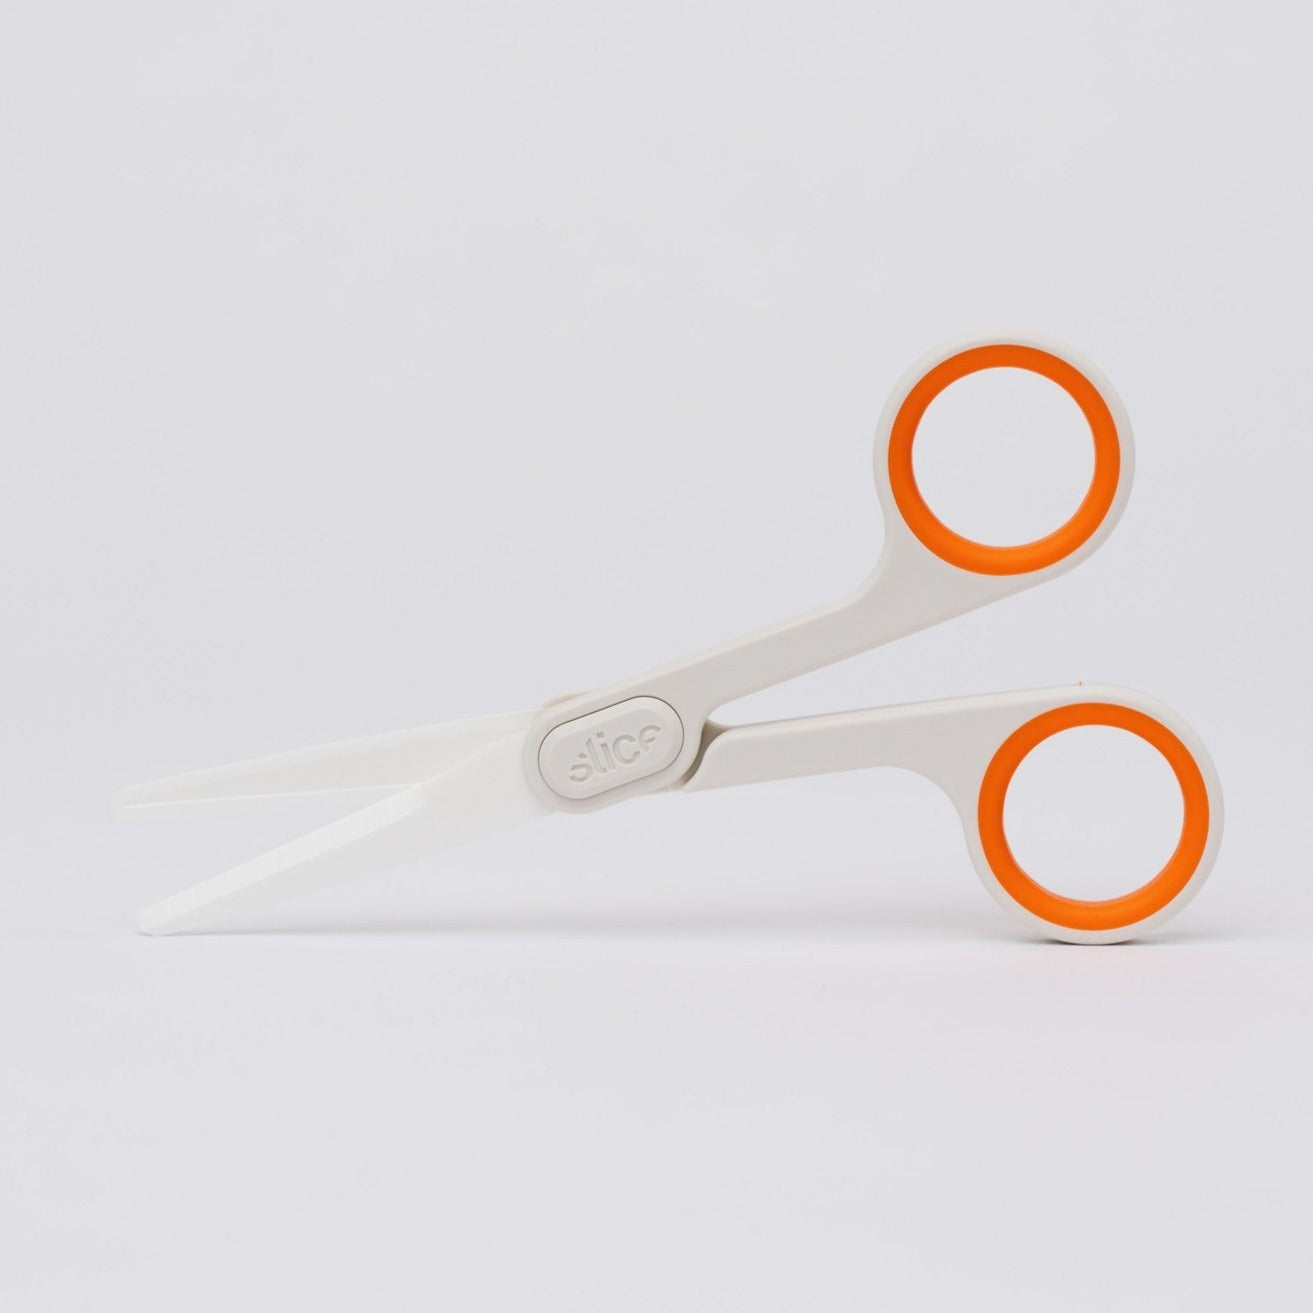 Slice Small Scissors:Facility Safety and Maintenance:Hand Tools and Power